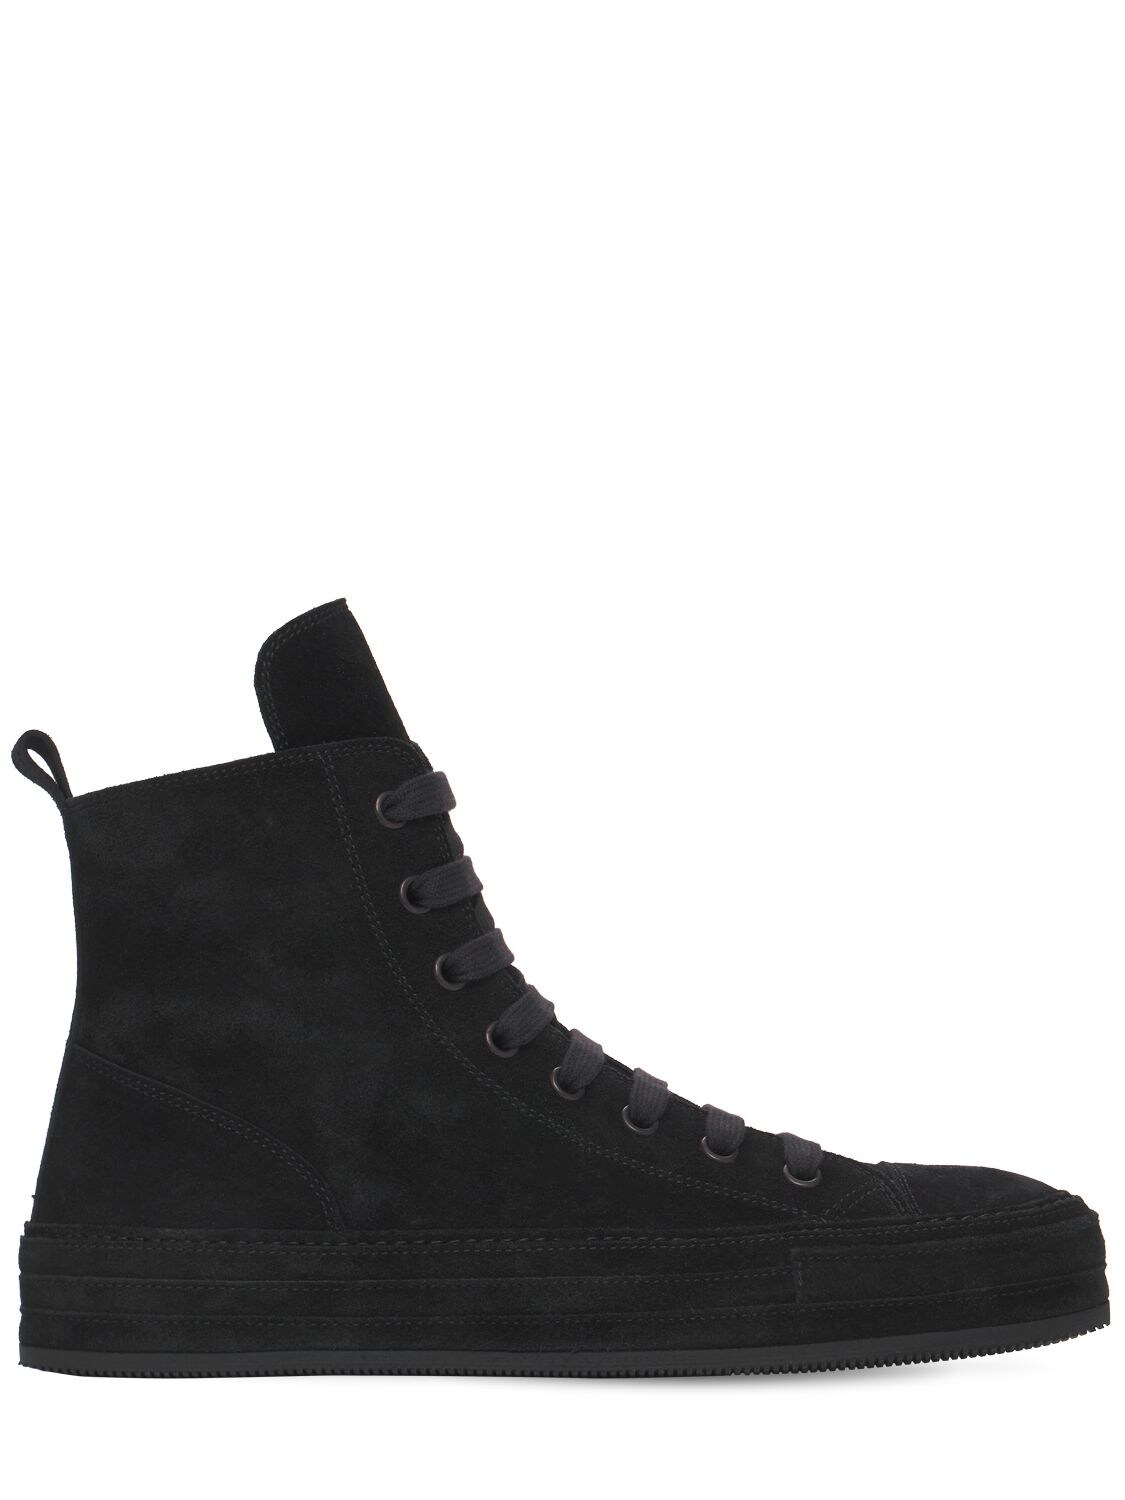 ANN DEMEULEMEESTER SUEDE HIGH-TOP SNEAKERS,73IA5I003-MDK50